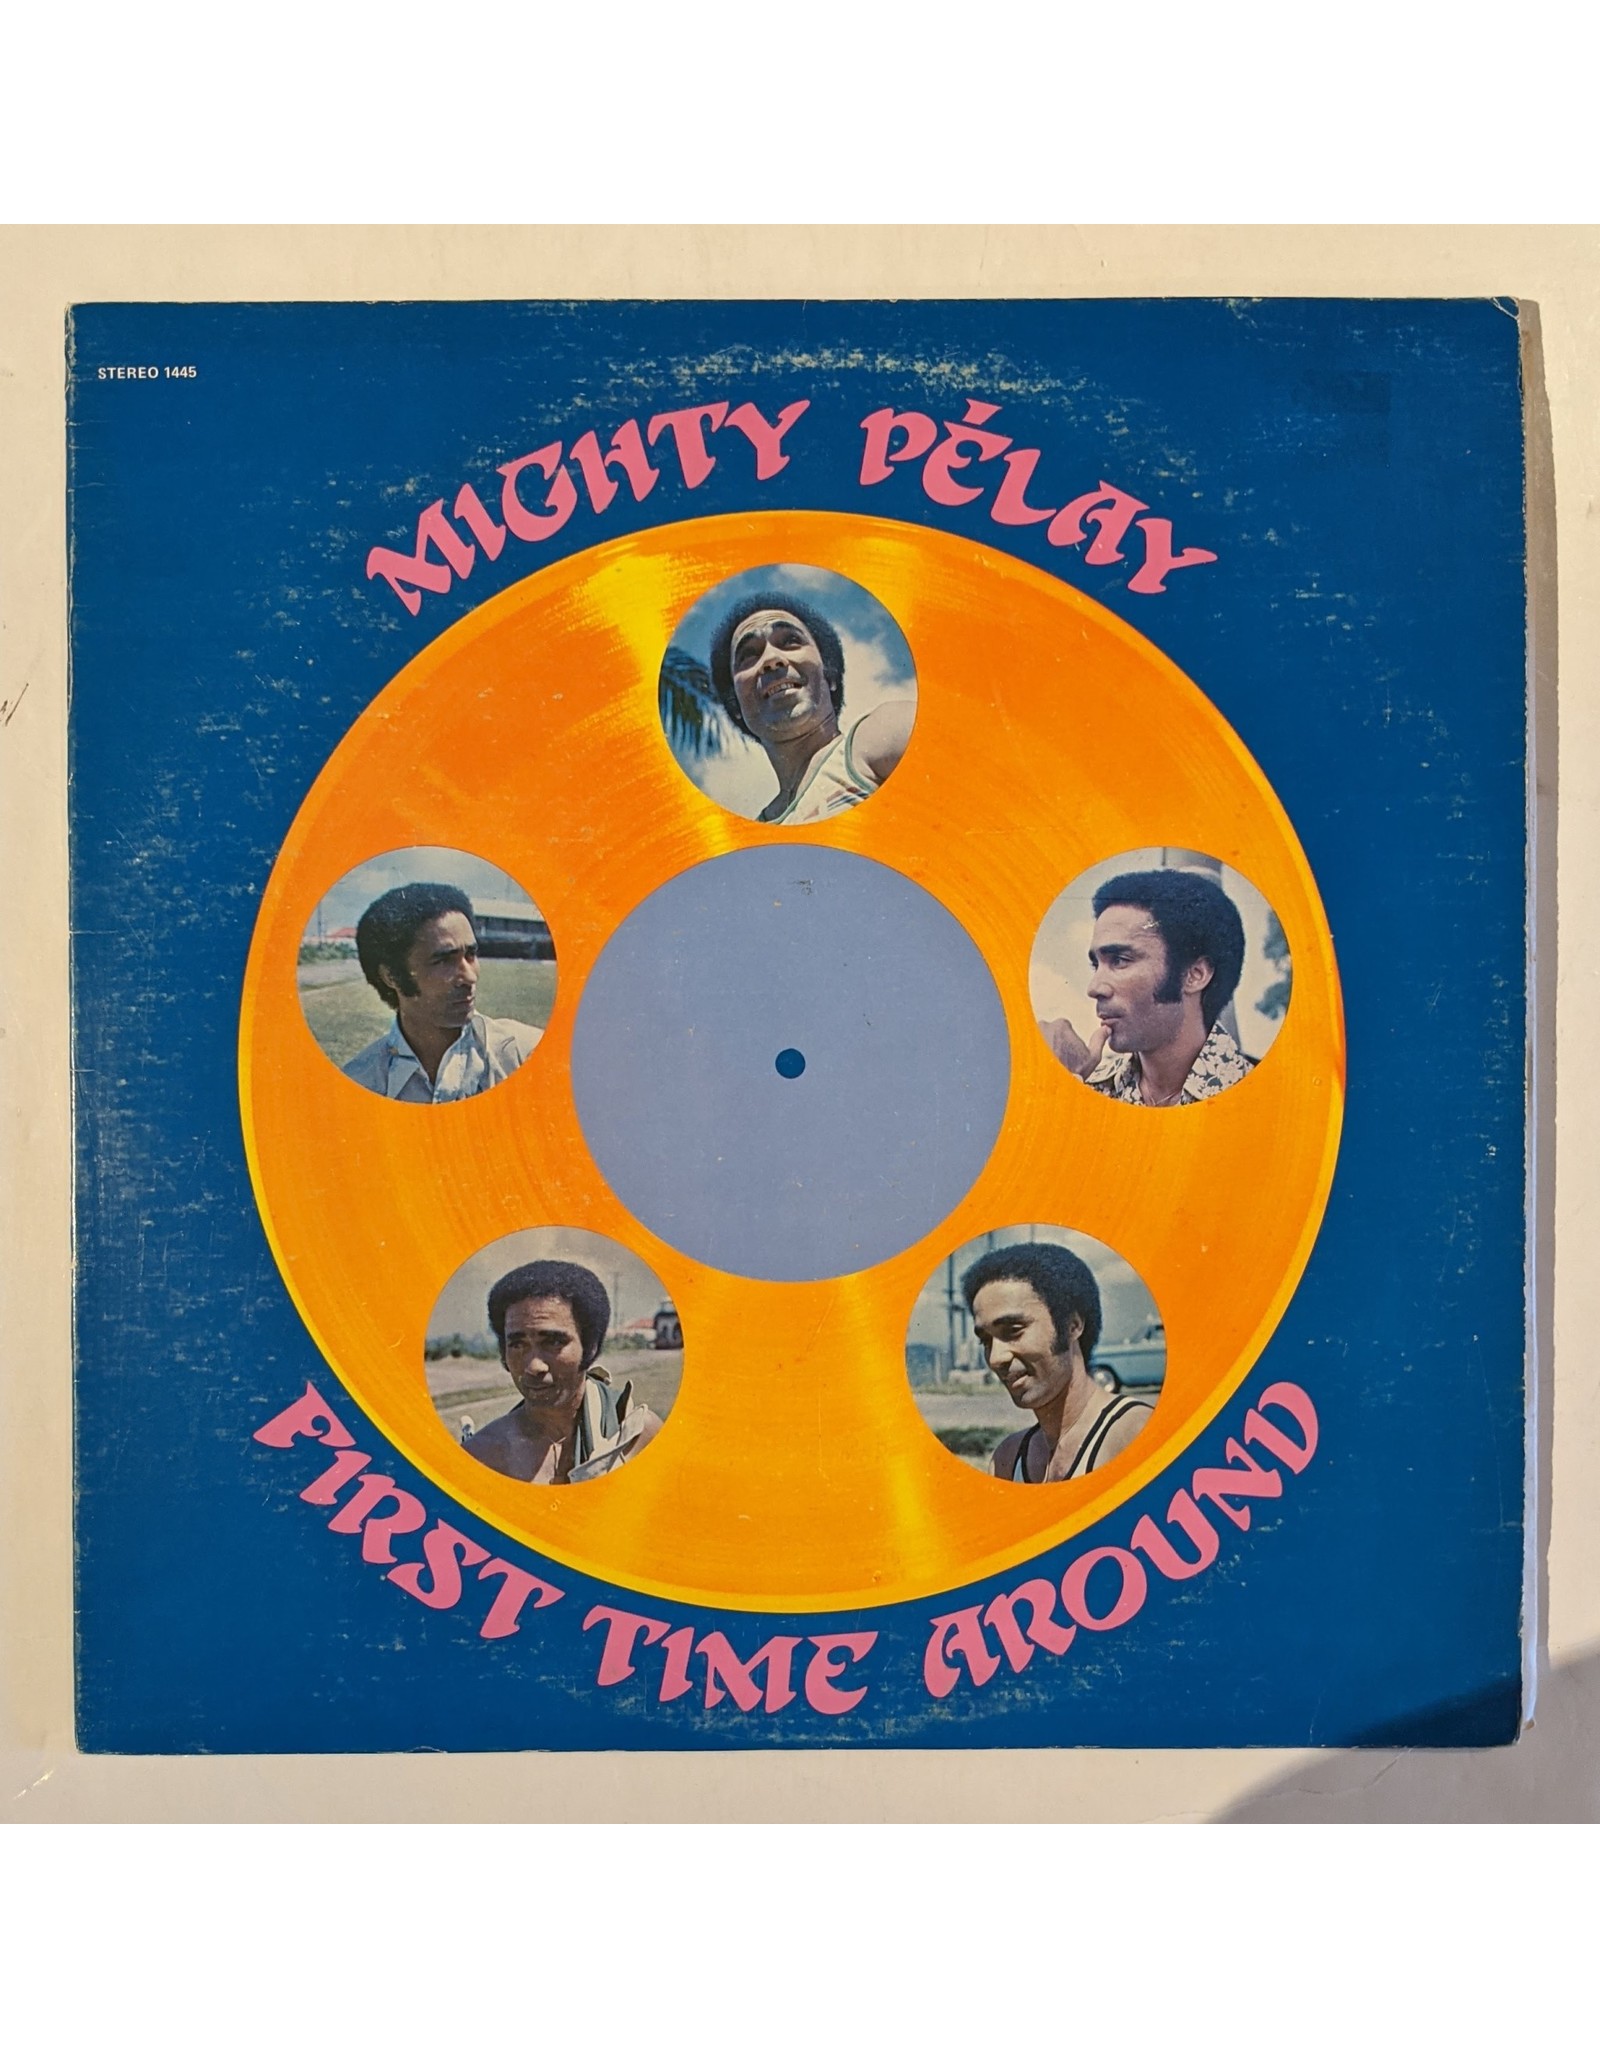 USED: Mighty Pelay: First Time Around LP